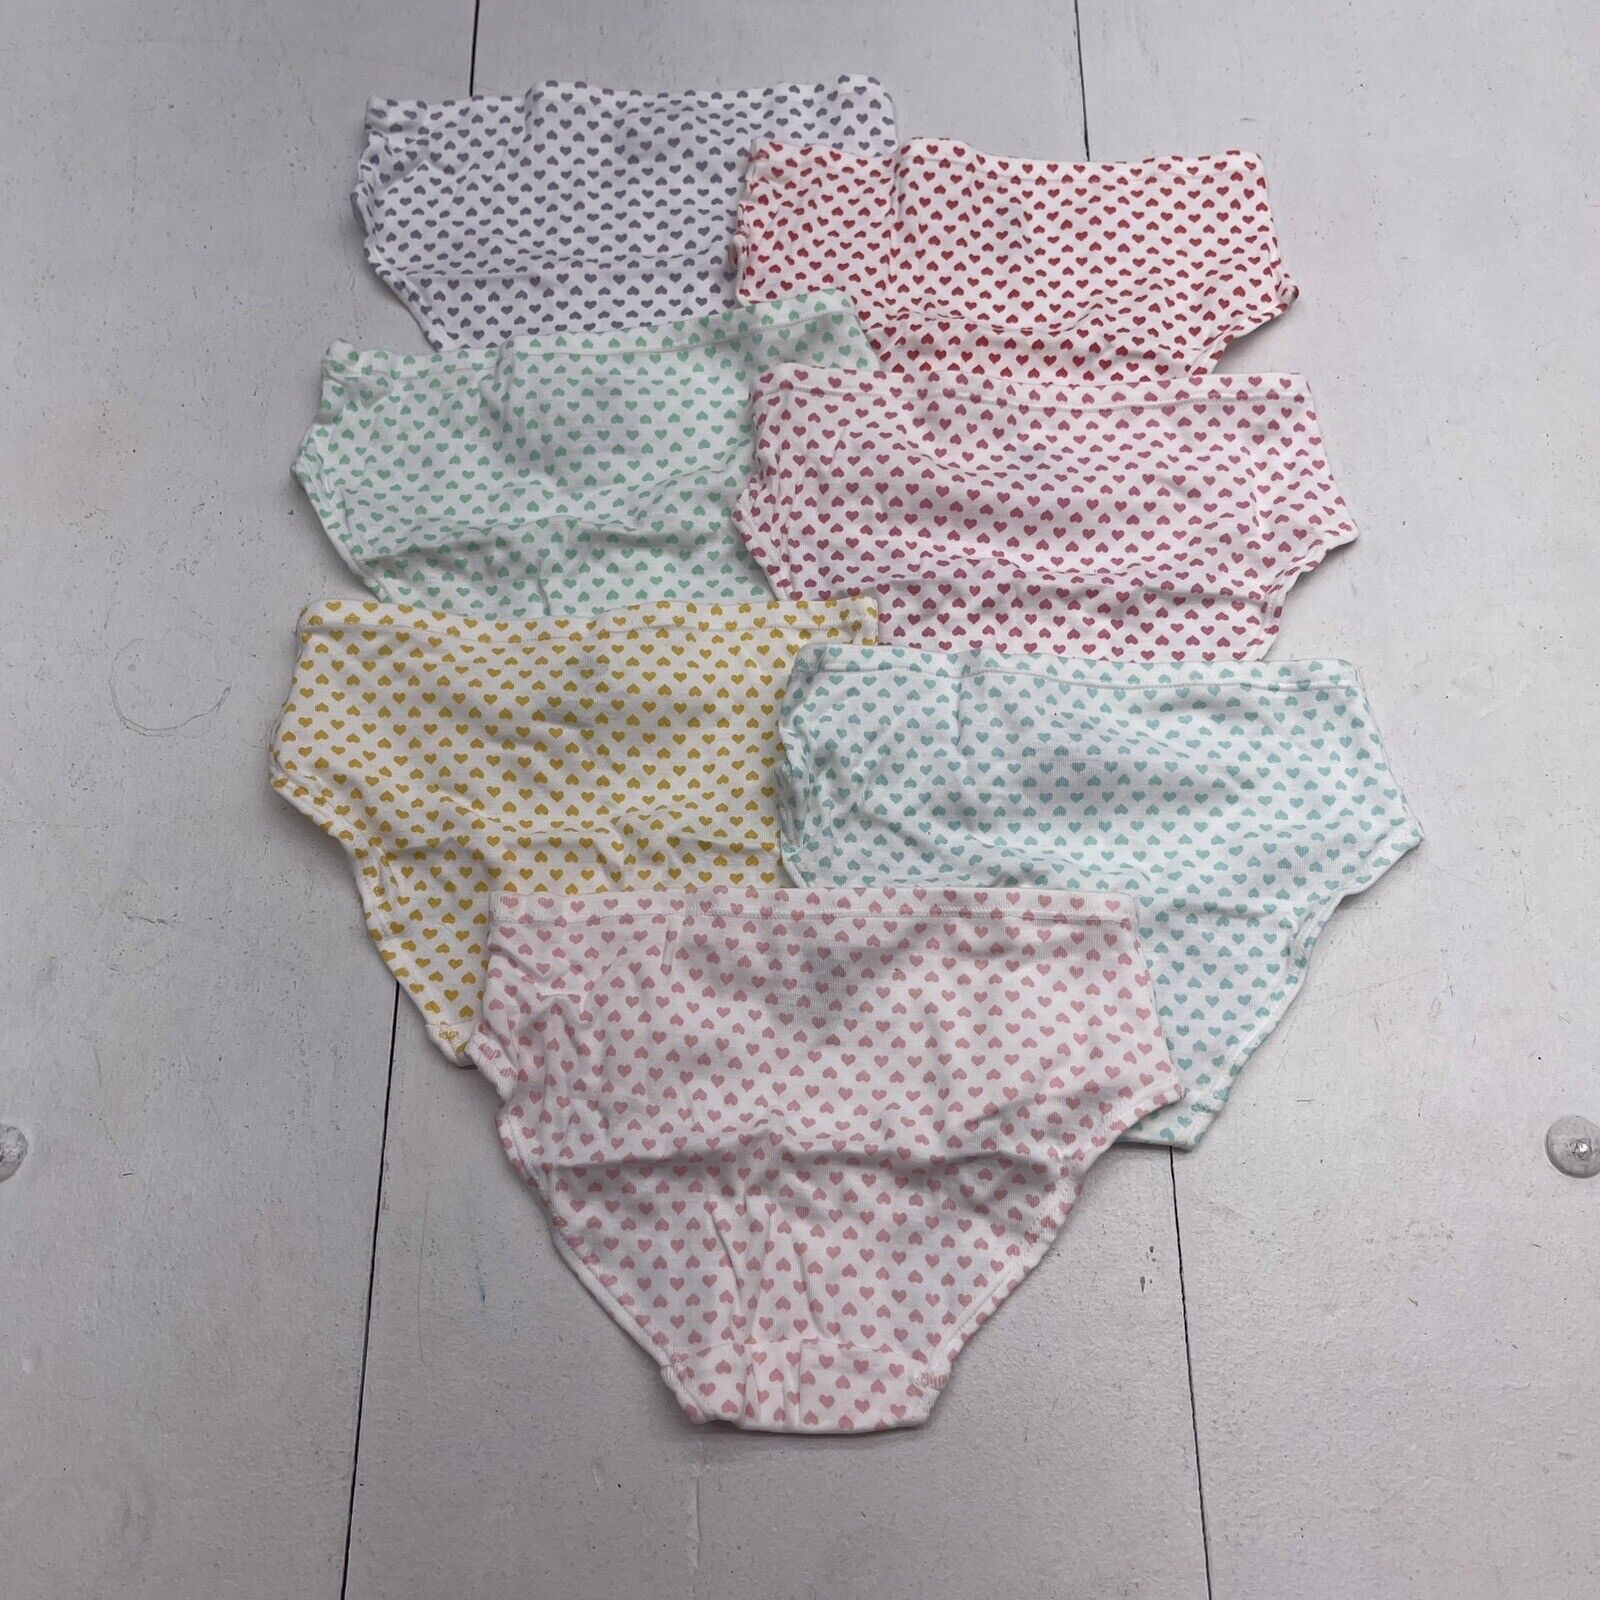 Lucky & Me Girls Underwear - Days of the Week set of 7 - Size 6 - New